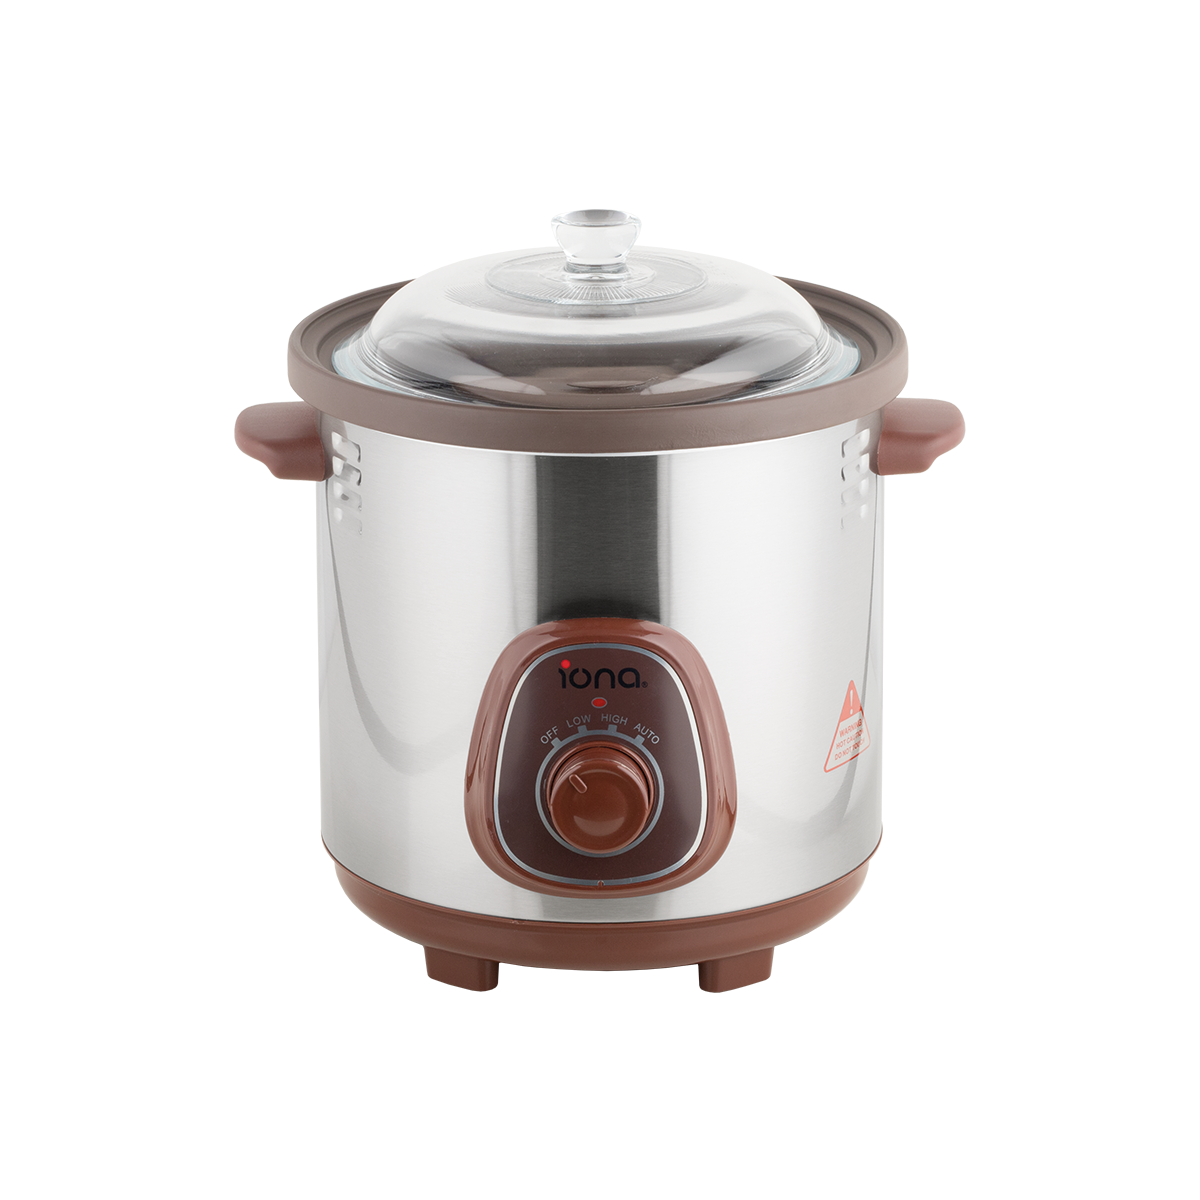 https://www.iona.com.sg/1503-superlarge_default/IONA-GLSC600-60l-auto-slow-cooker-with-double-boiler.jpg